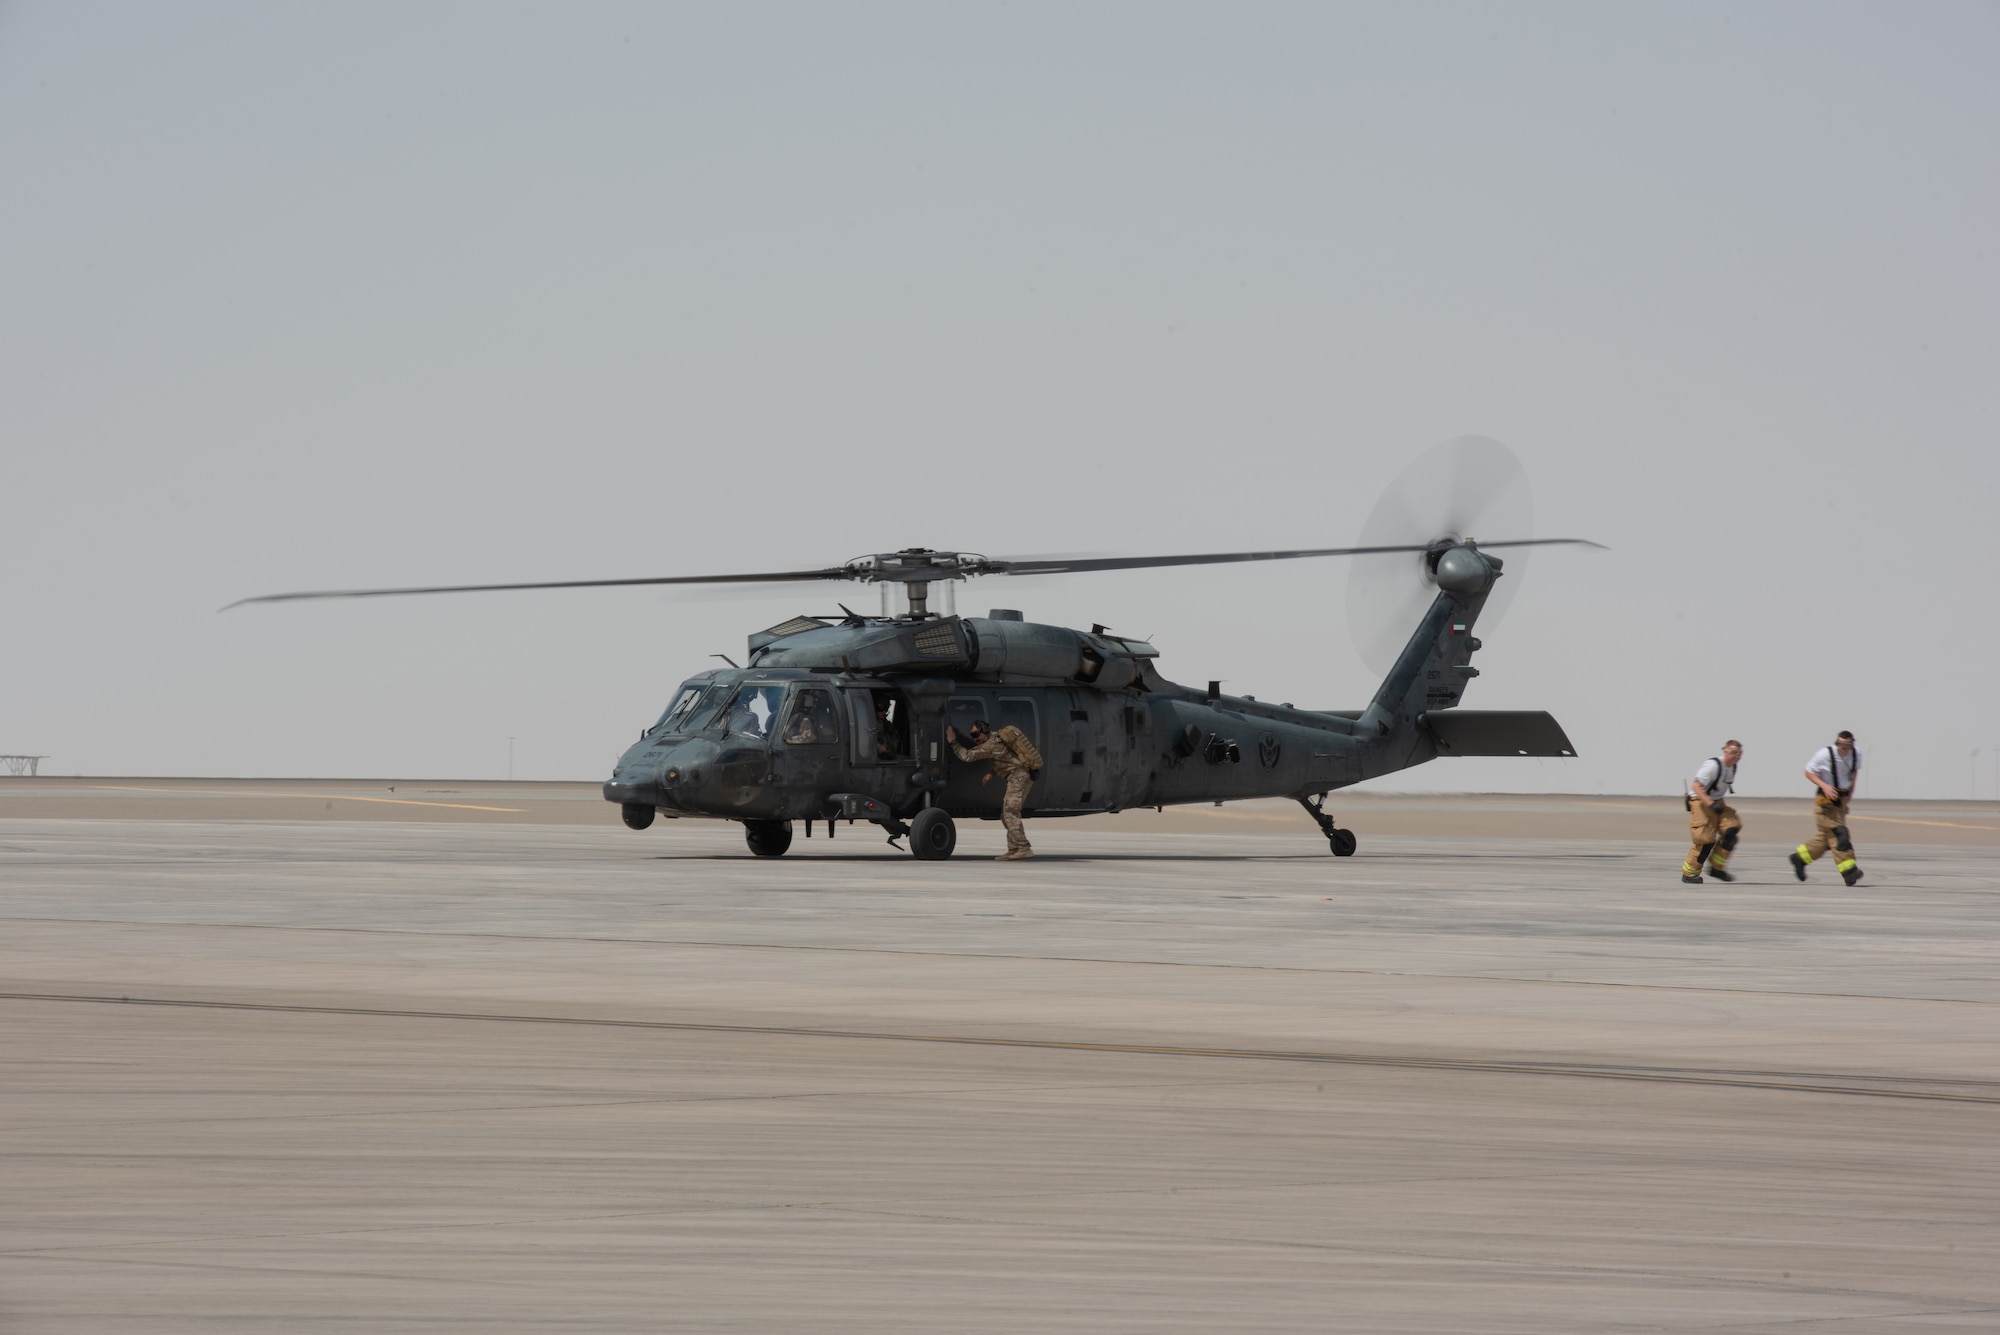 380th Air Expeditionary Wing firefighters back away from an Emirati UH-60 Black Hawk after handing off a simulated patient during a large first responder exercise Sept. 24, 2019, at Al Dhafra Air Base, United Arab Emirates. The exercise helped foster partnership with the United Arab Emirates Air Force Joint Aviation Command to practice an aeromedical evacuation scenario via helicopter. (U.S. Air Force photo by Staff Sgt. Chris Thornbury)